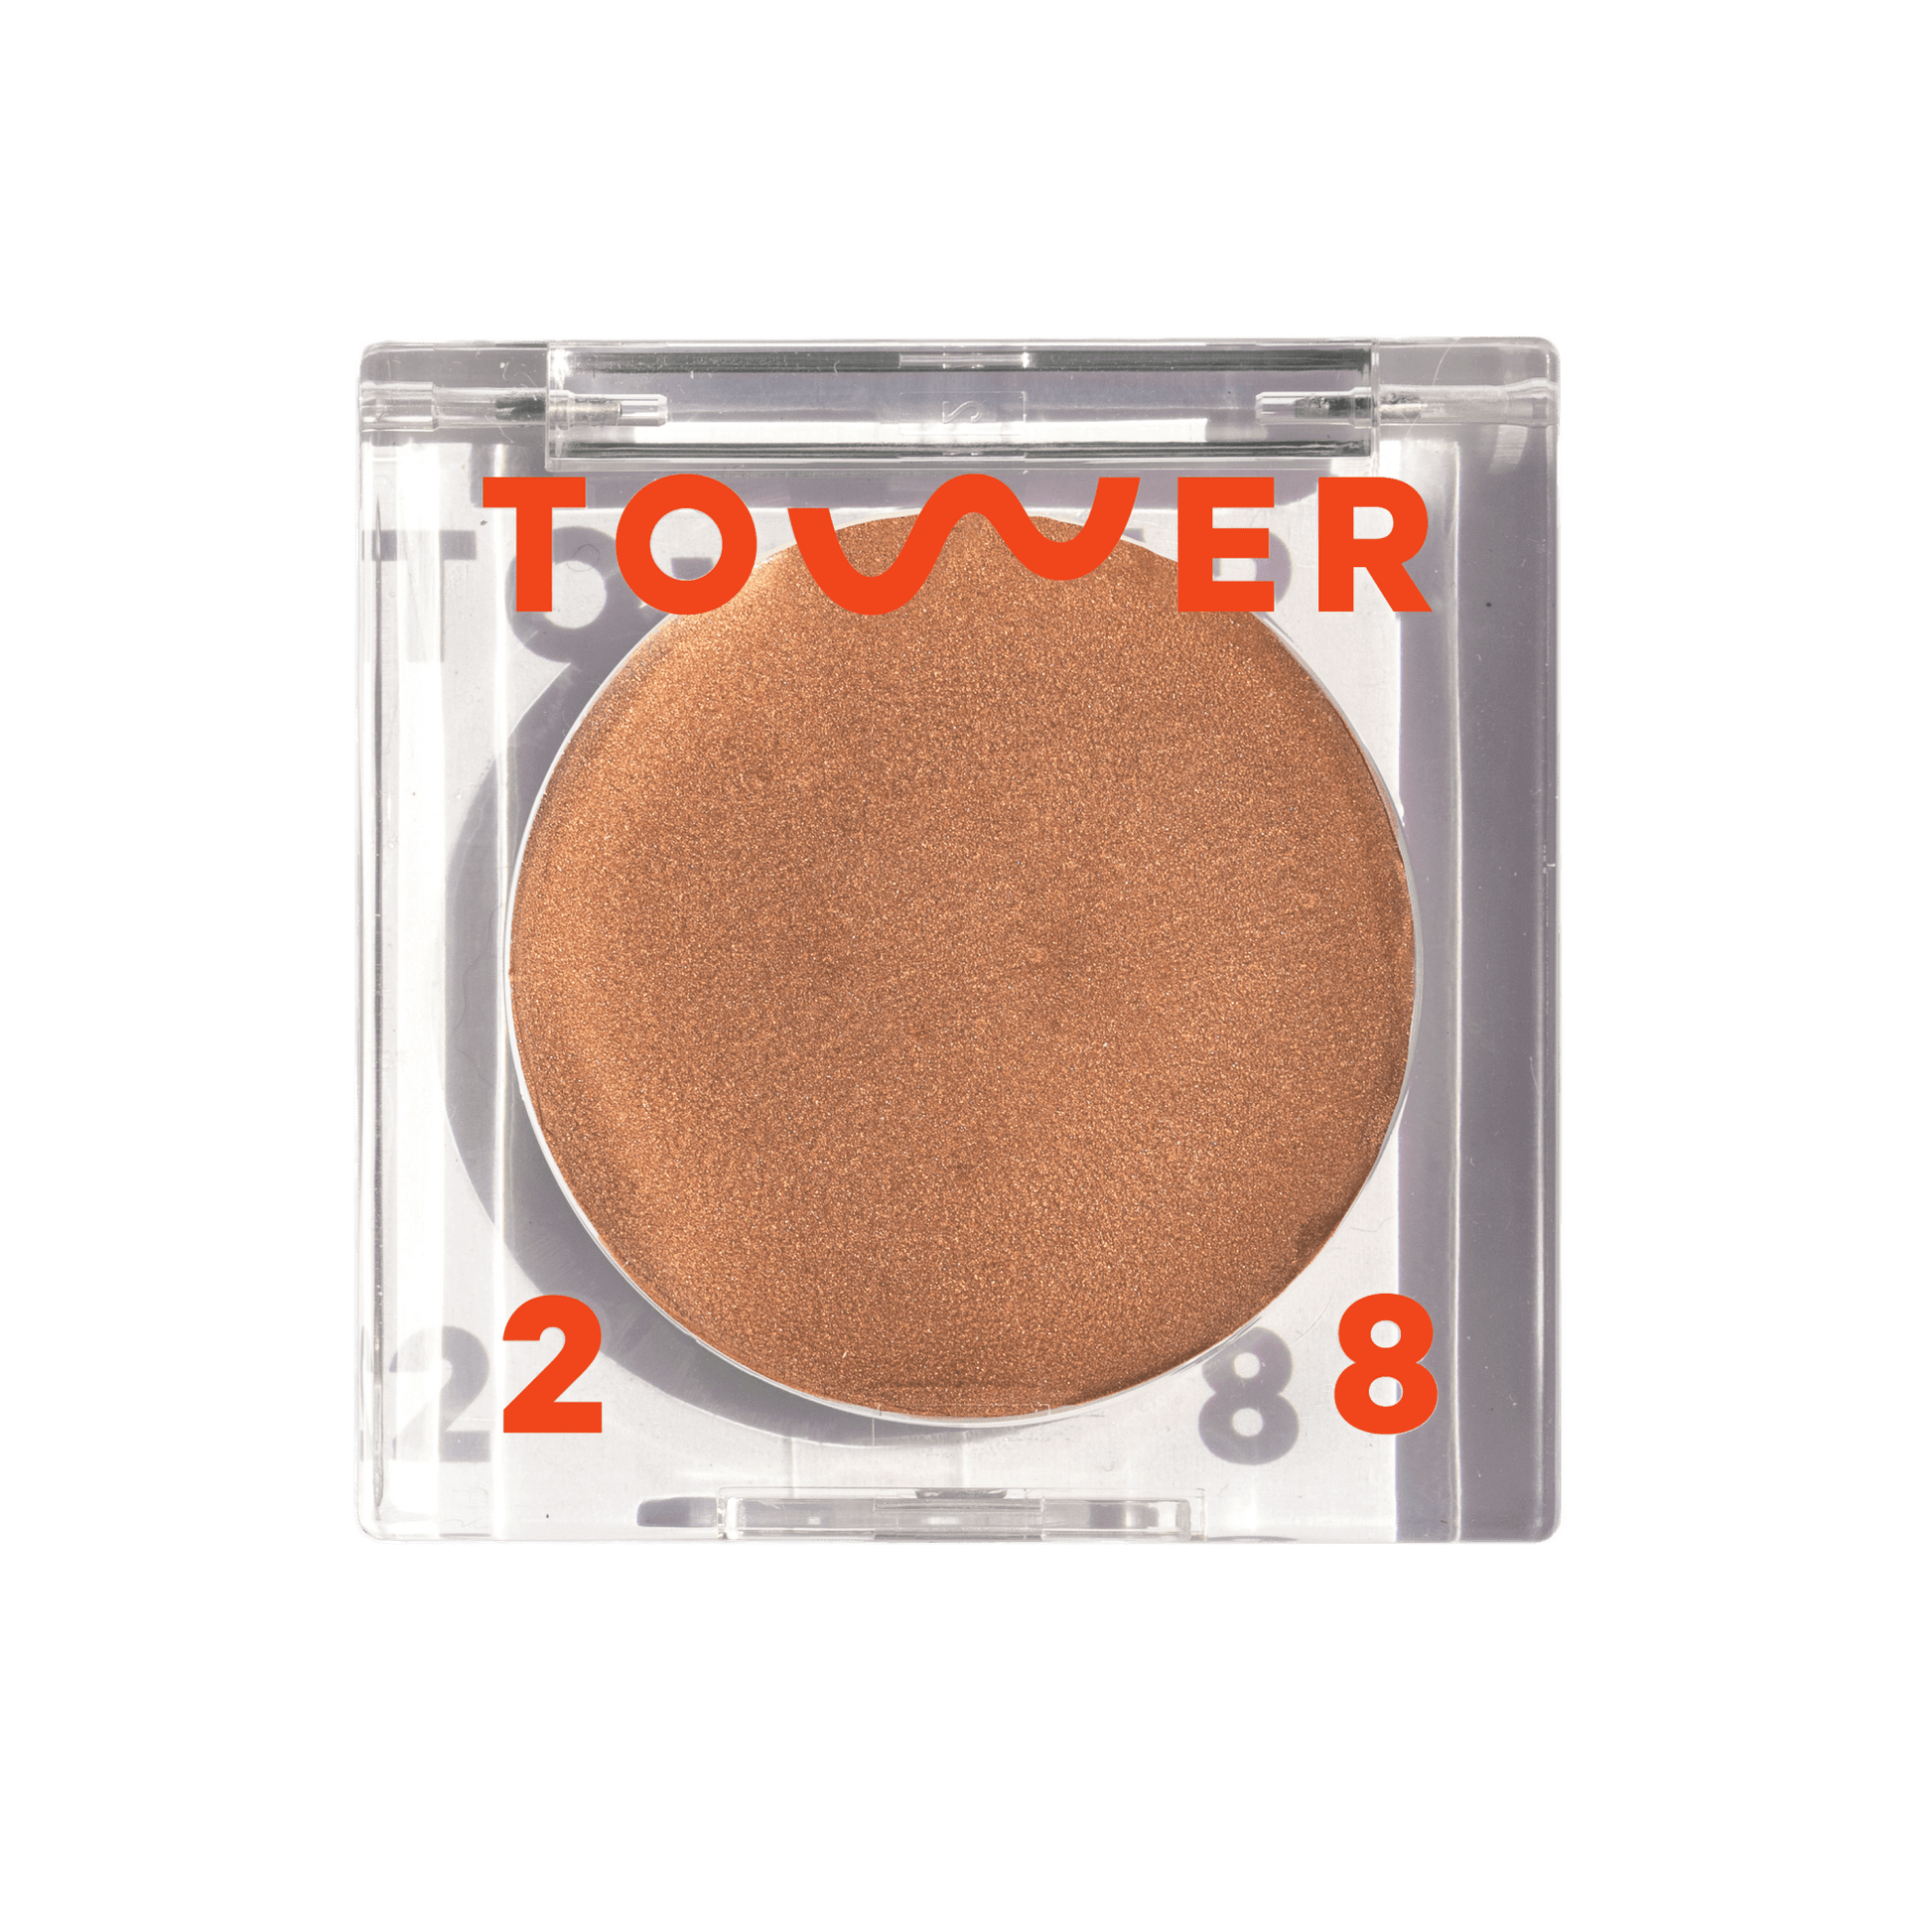 8 cream bronzers to try for a sun-kissed glow - Reviewed